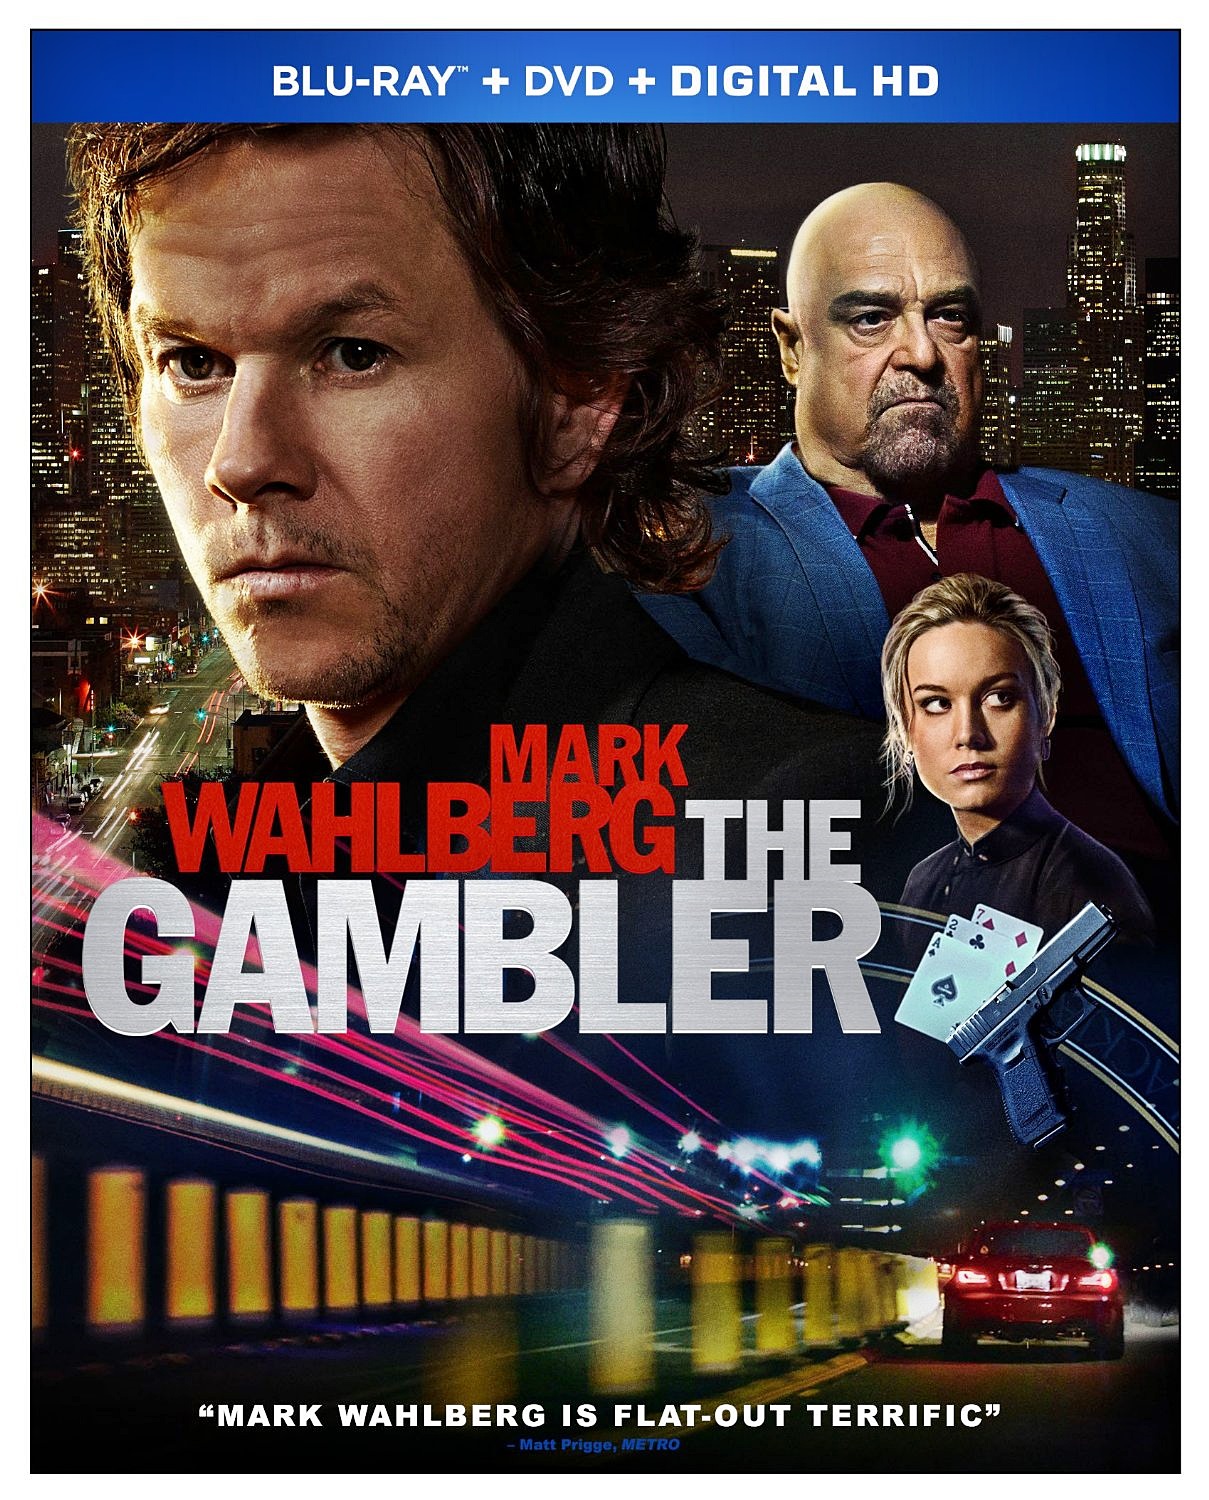 The Gambler - Blu-ray Movie Review